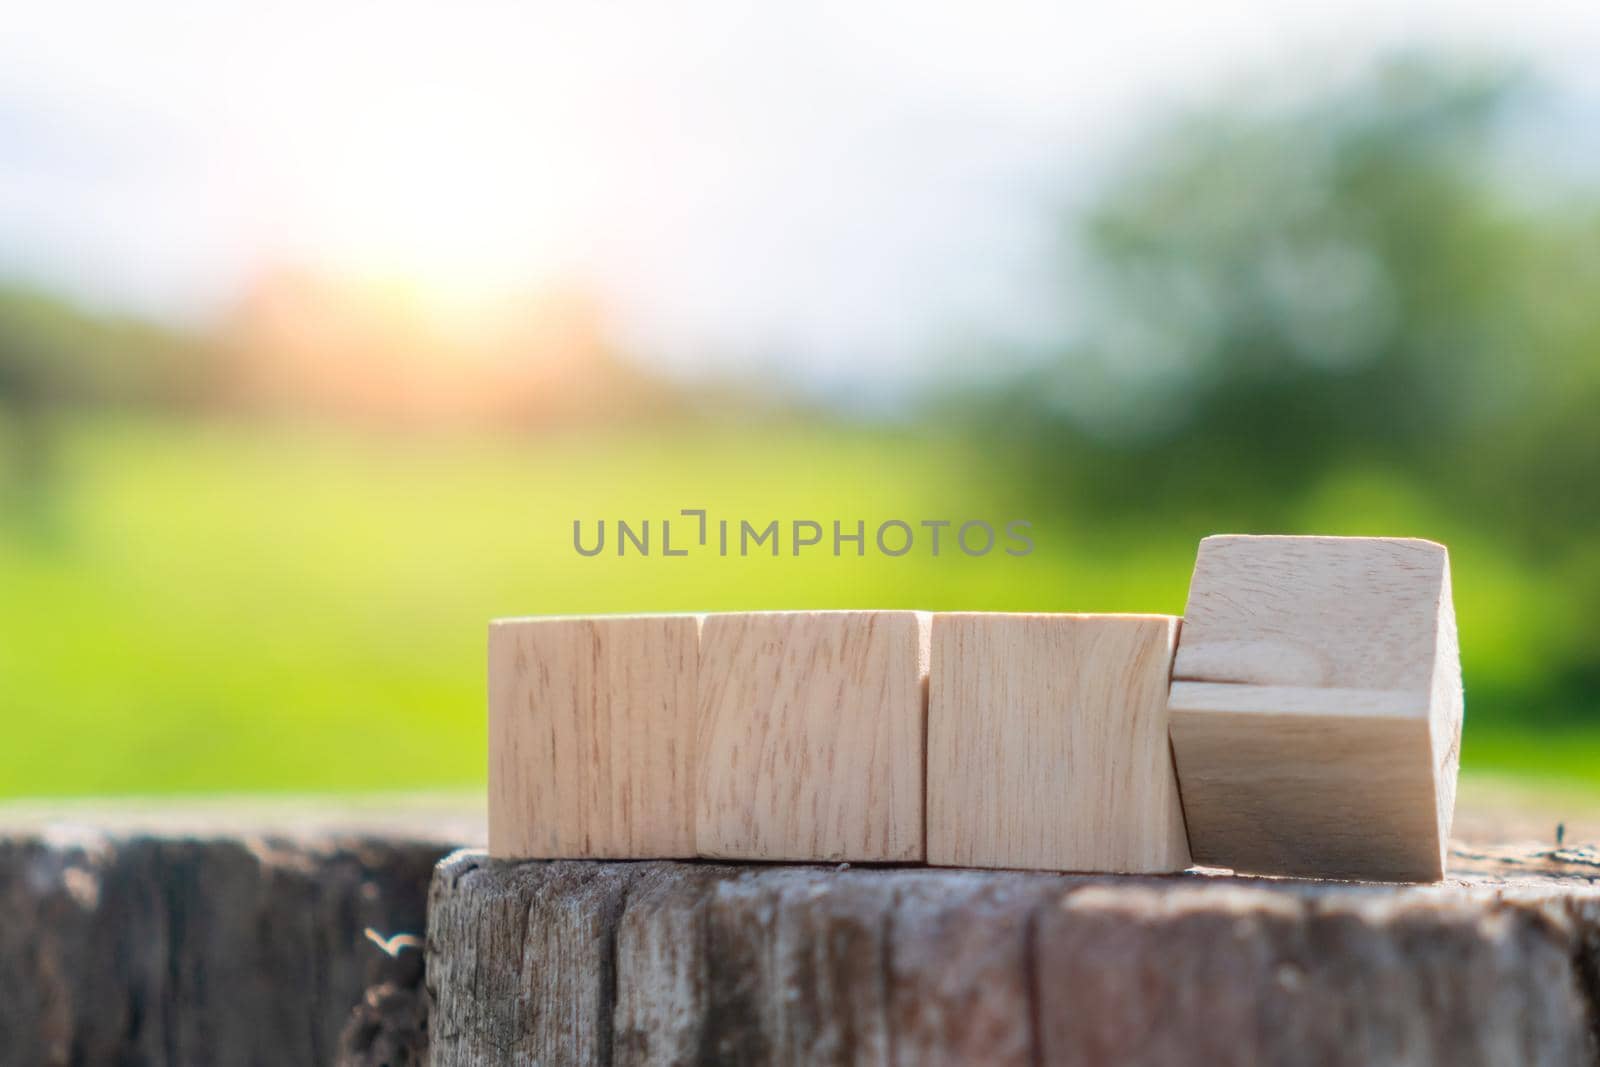 In a hand-held background, a blank wooden cube can be used to add text or an icon.